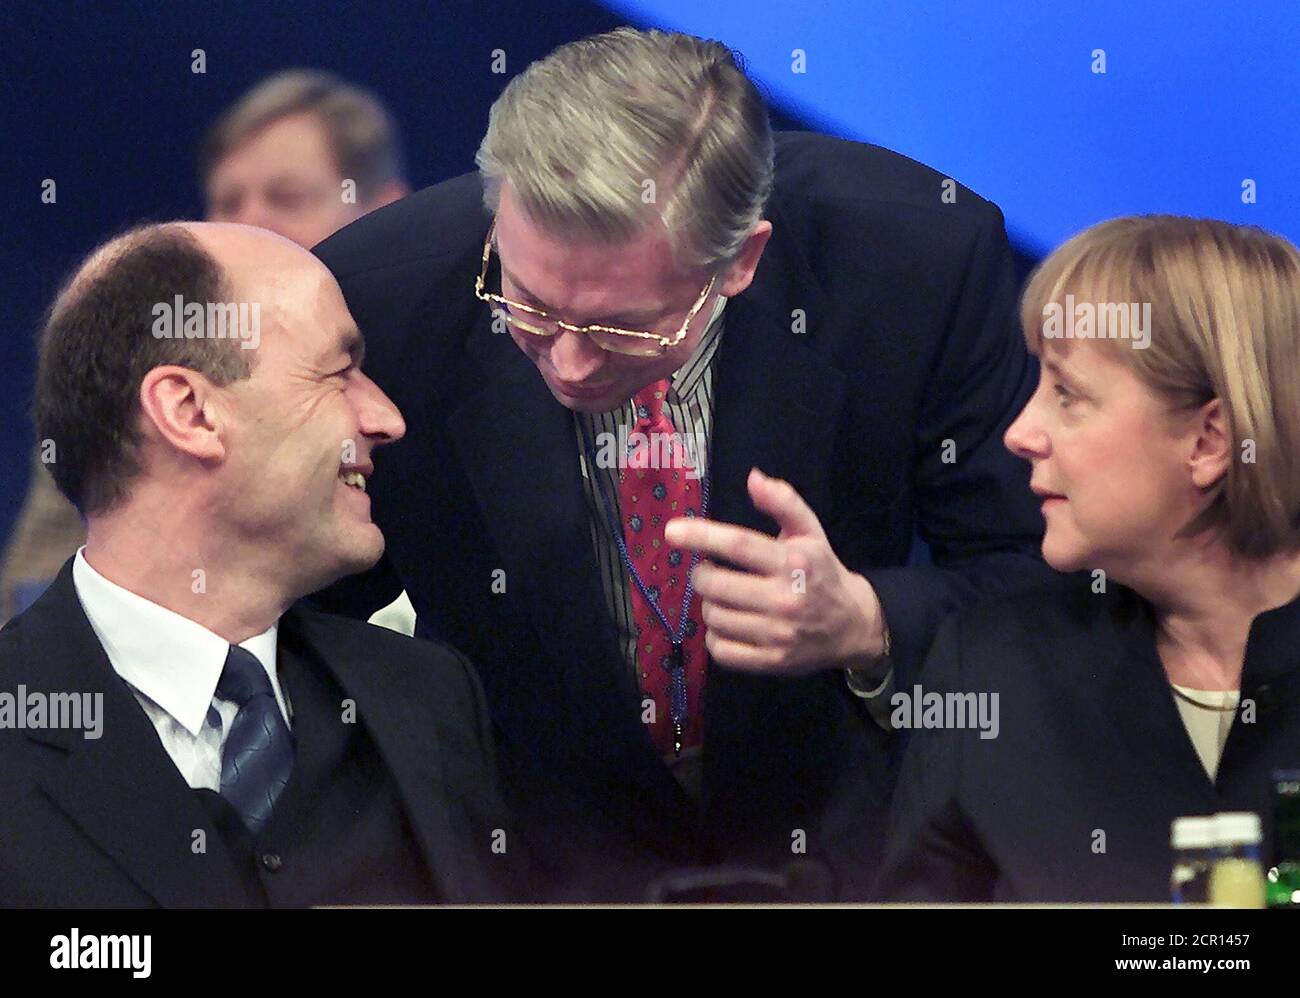 Laurenz Meyer (L), secretary general of the conservative Christian Democratic Union (CDU) and party leader Angela Merkel listen to Hesse's Prime Minister Roland Koch during the 14th general party meeting of the CDU in Dresden, December 3, 2001. The conservatives, struggling to rebuild their party after a funding scandal around former chancellor Helmut Kohl and trailing behind Schroeder in the polls, said the event will focus on immigration and Social Democratic Chancellor Schroeder's failure to cut unemployment. REUTERS/Arnd Wiegmann  KP/WS Stock Photo